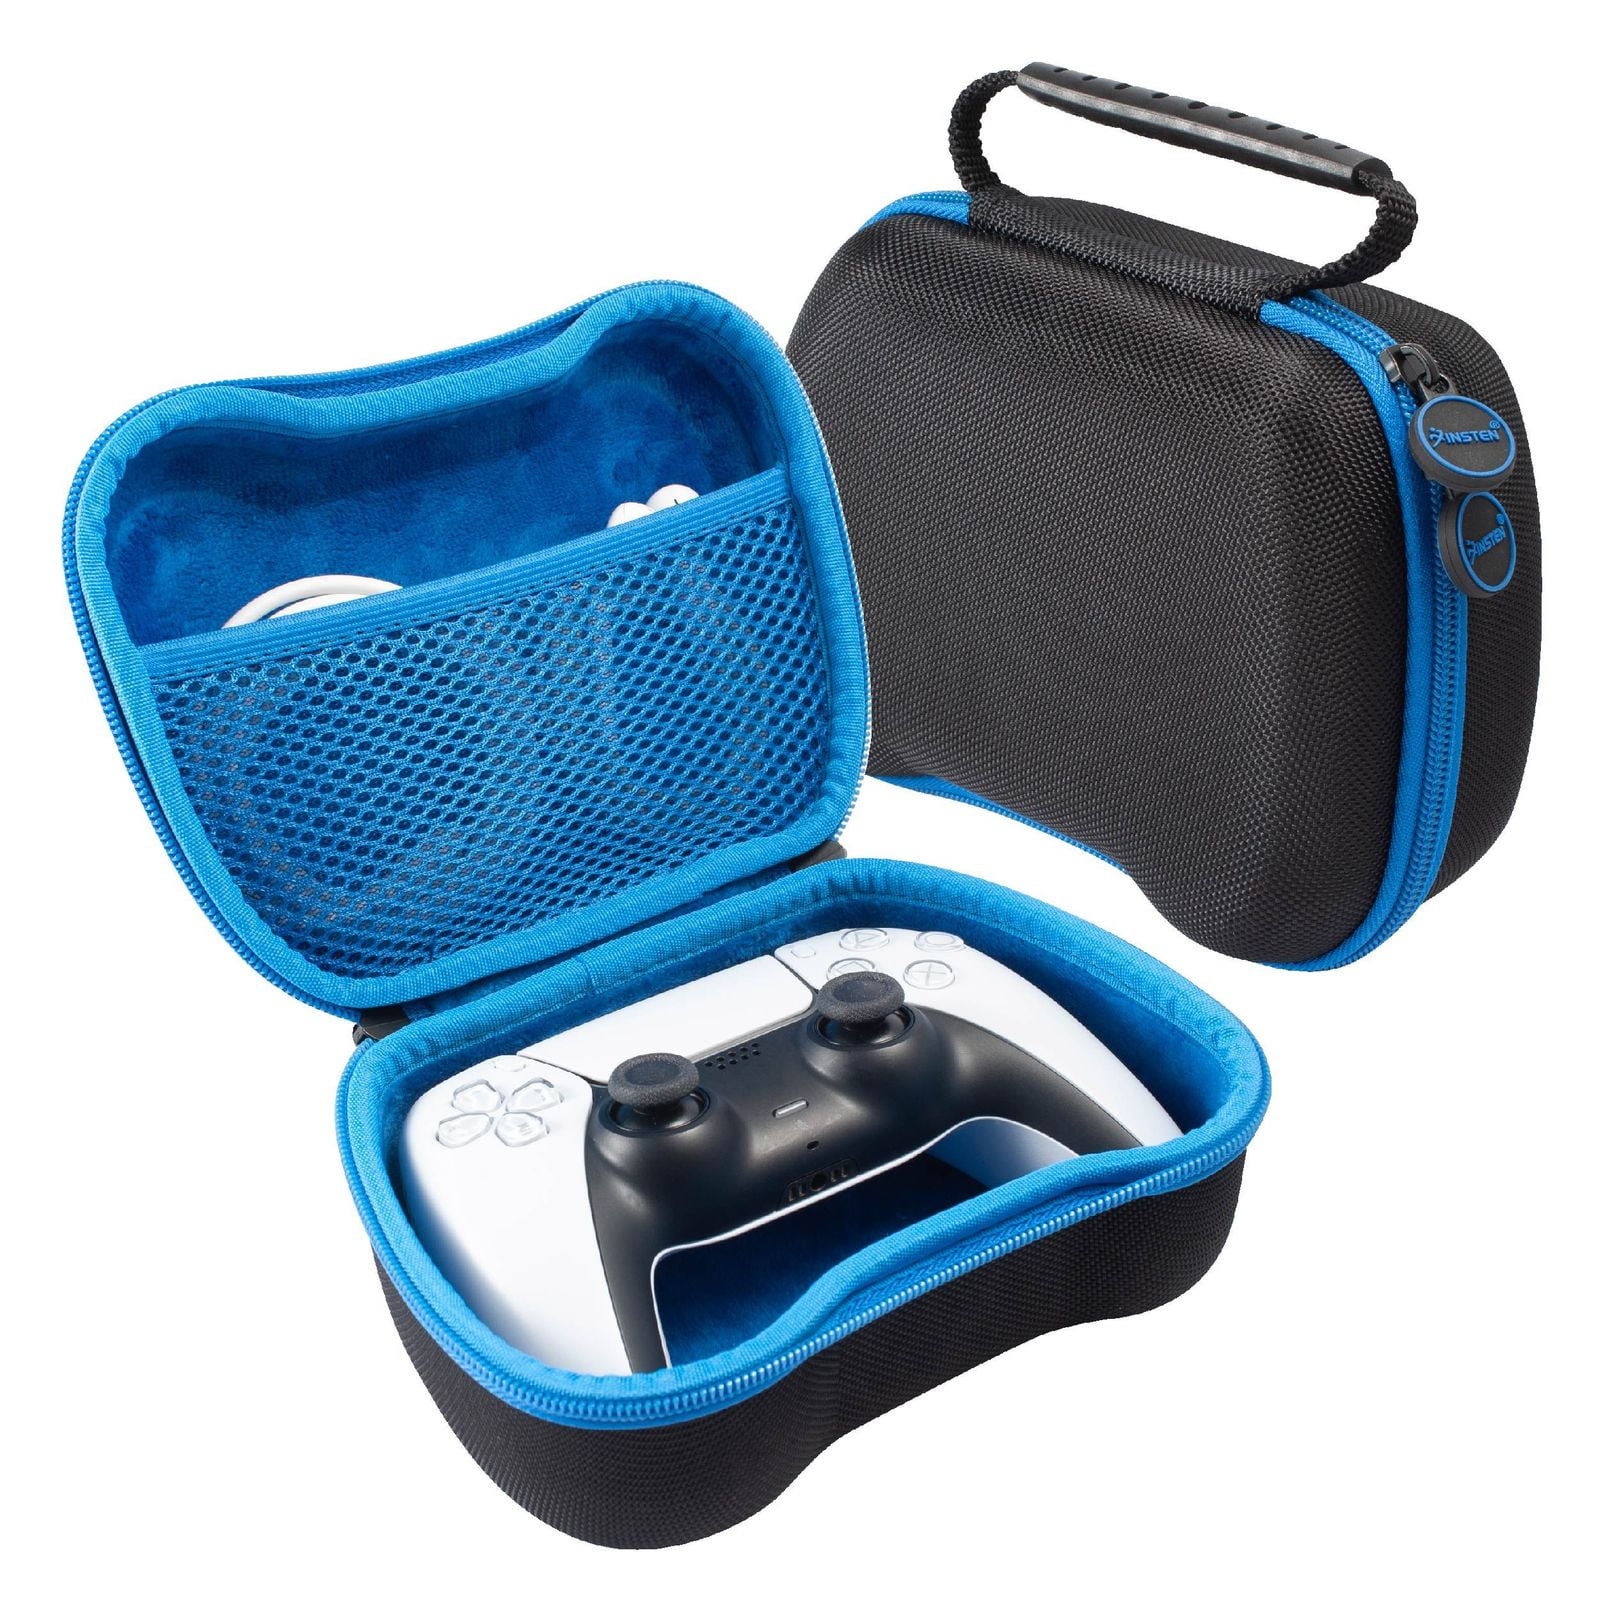 Portable Protective Bag Anti-shock Dustproof Case Carrying Bag Travel Handbag for PlayStation4 PS4 Slim Travel Carrying Storage Case for PS4 Gaming Console Carrying Case for Travel PS4 Pro